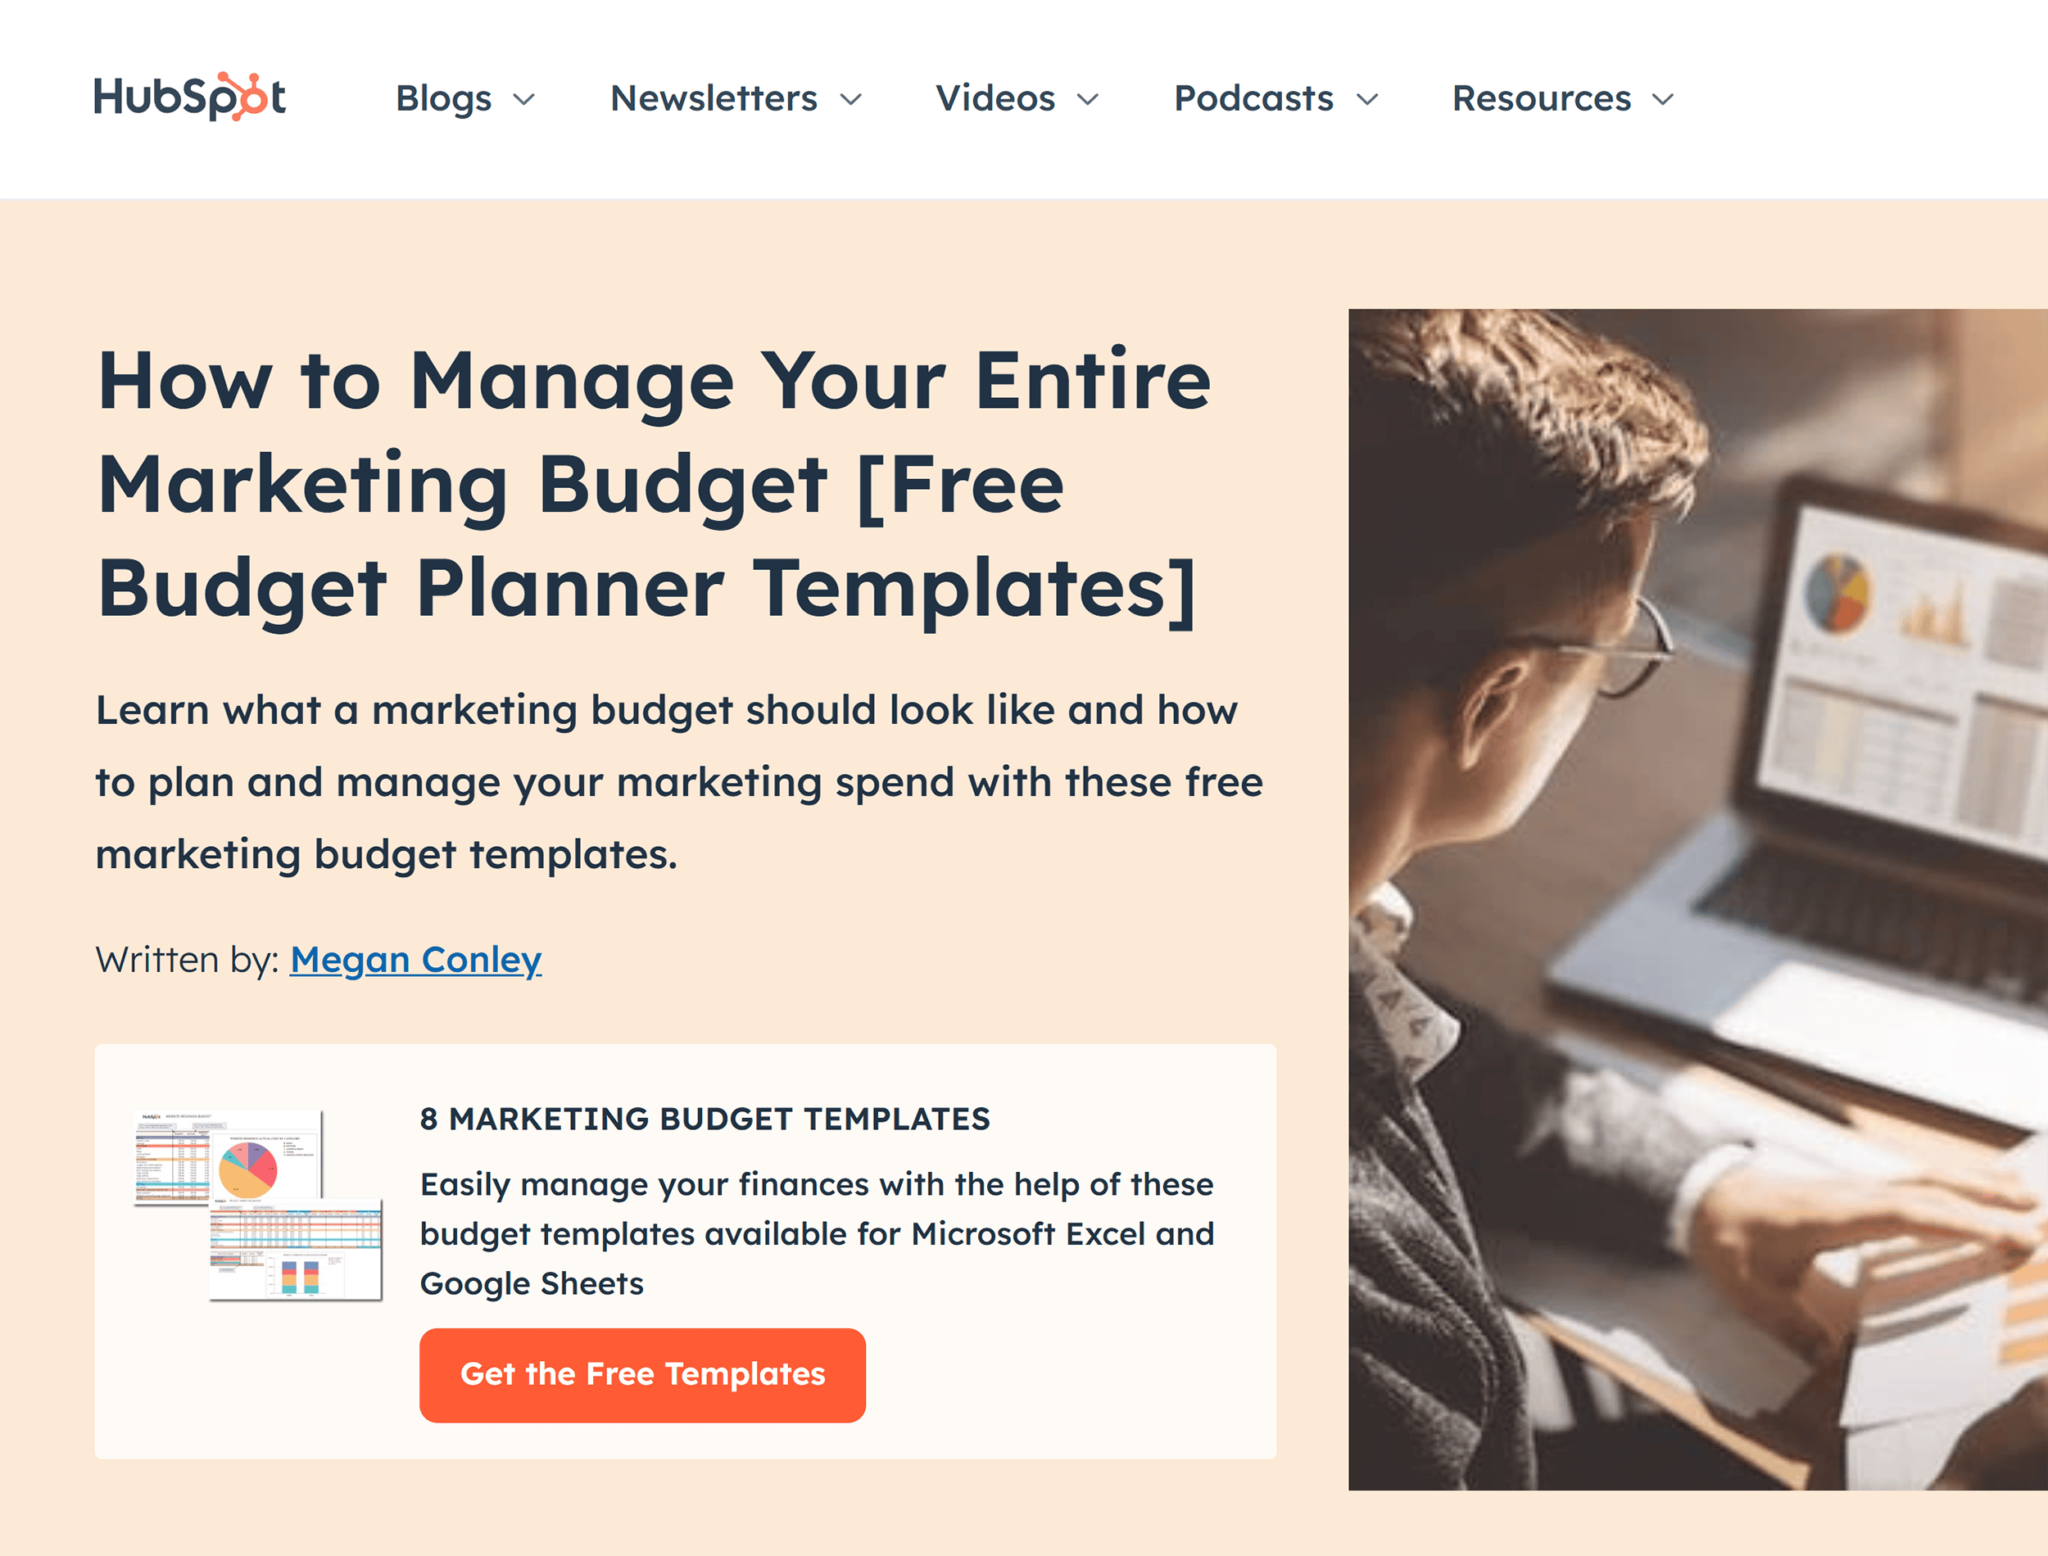 hubspot-free-budget-templates Small Business Marketing: 6 Proven Strategies for More Reach